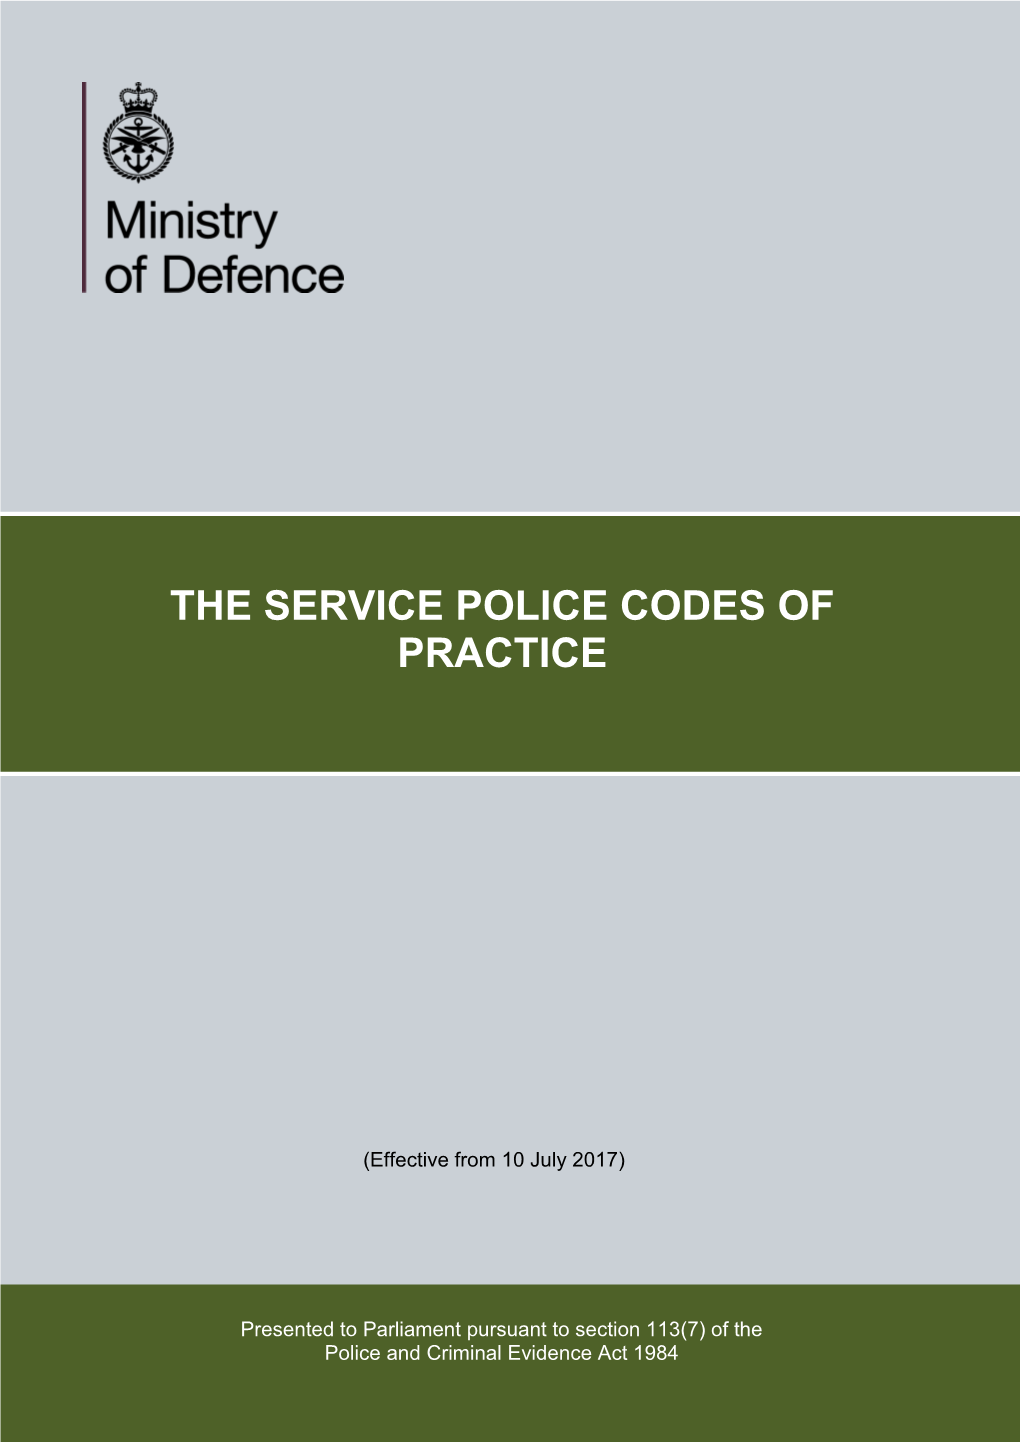 Service Police Codes of Practice